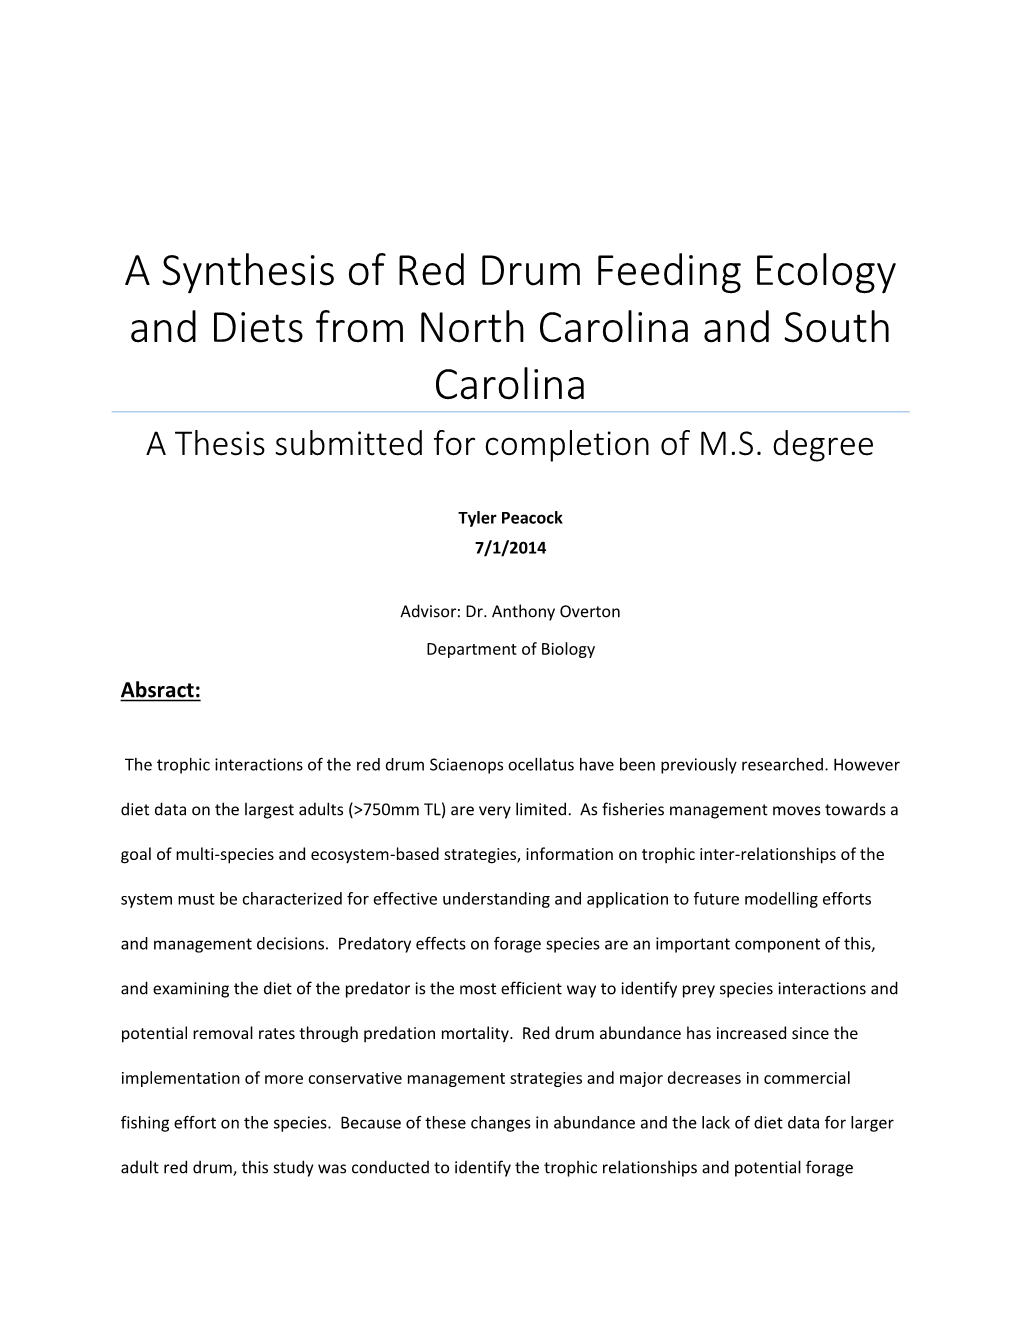 A Synthesis of Red Drum Feeding Ecology and Diets from North Carolina and South Carolina a Thesis Submitted for Completion of M.S